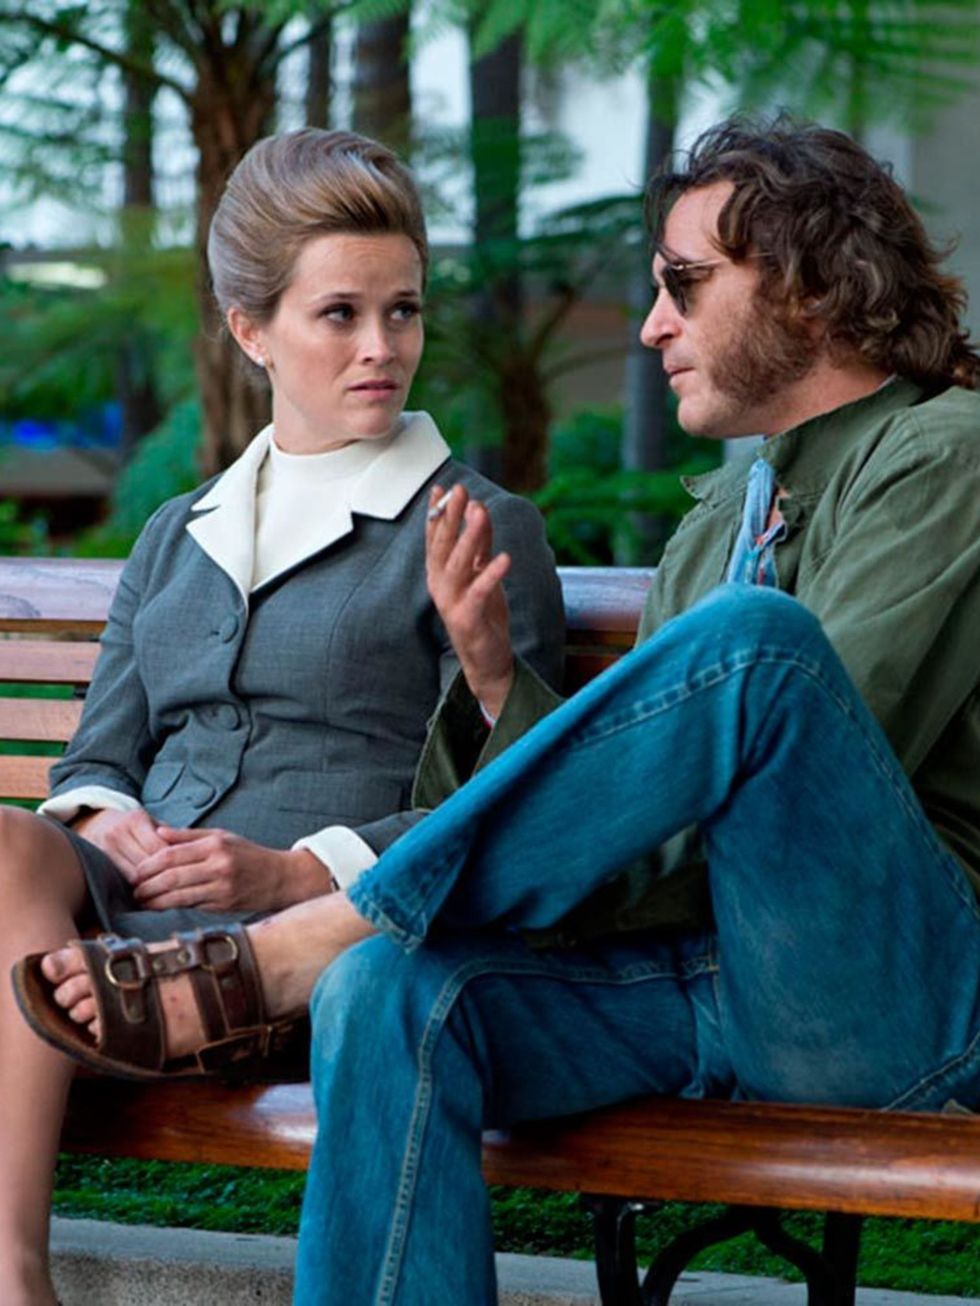 <p><strong>FILM: Inherent Vice</strong></p>

<p><span style="line-height:1.6">Paul Thomas Anderson has finally adapted the so-called unfilmable novel of the same name by Thomas Pynchon.</span></p>

<p><span style="line-height:1.6">Joaquin Phoenix stars 